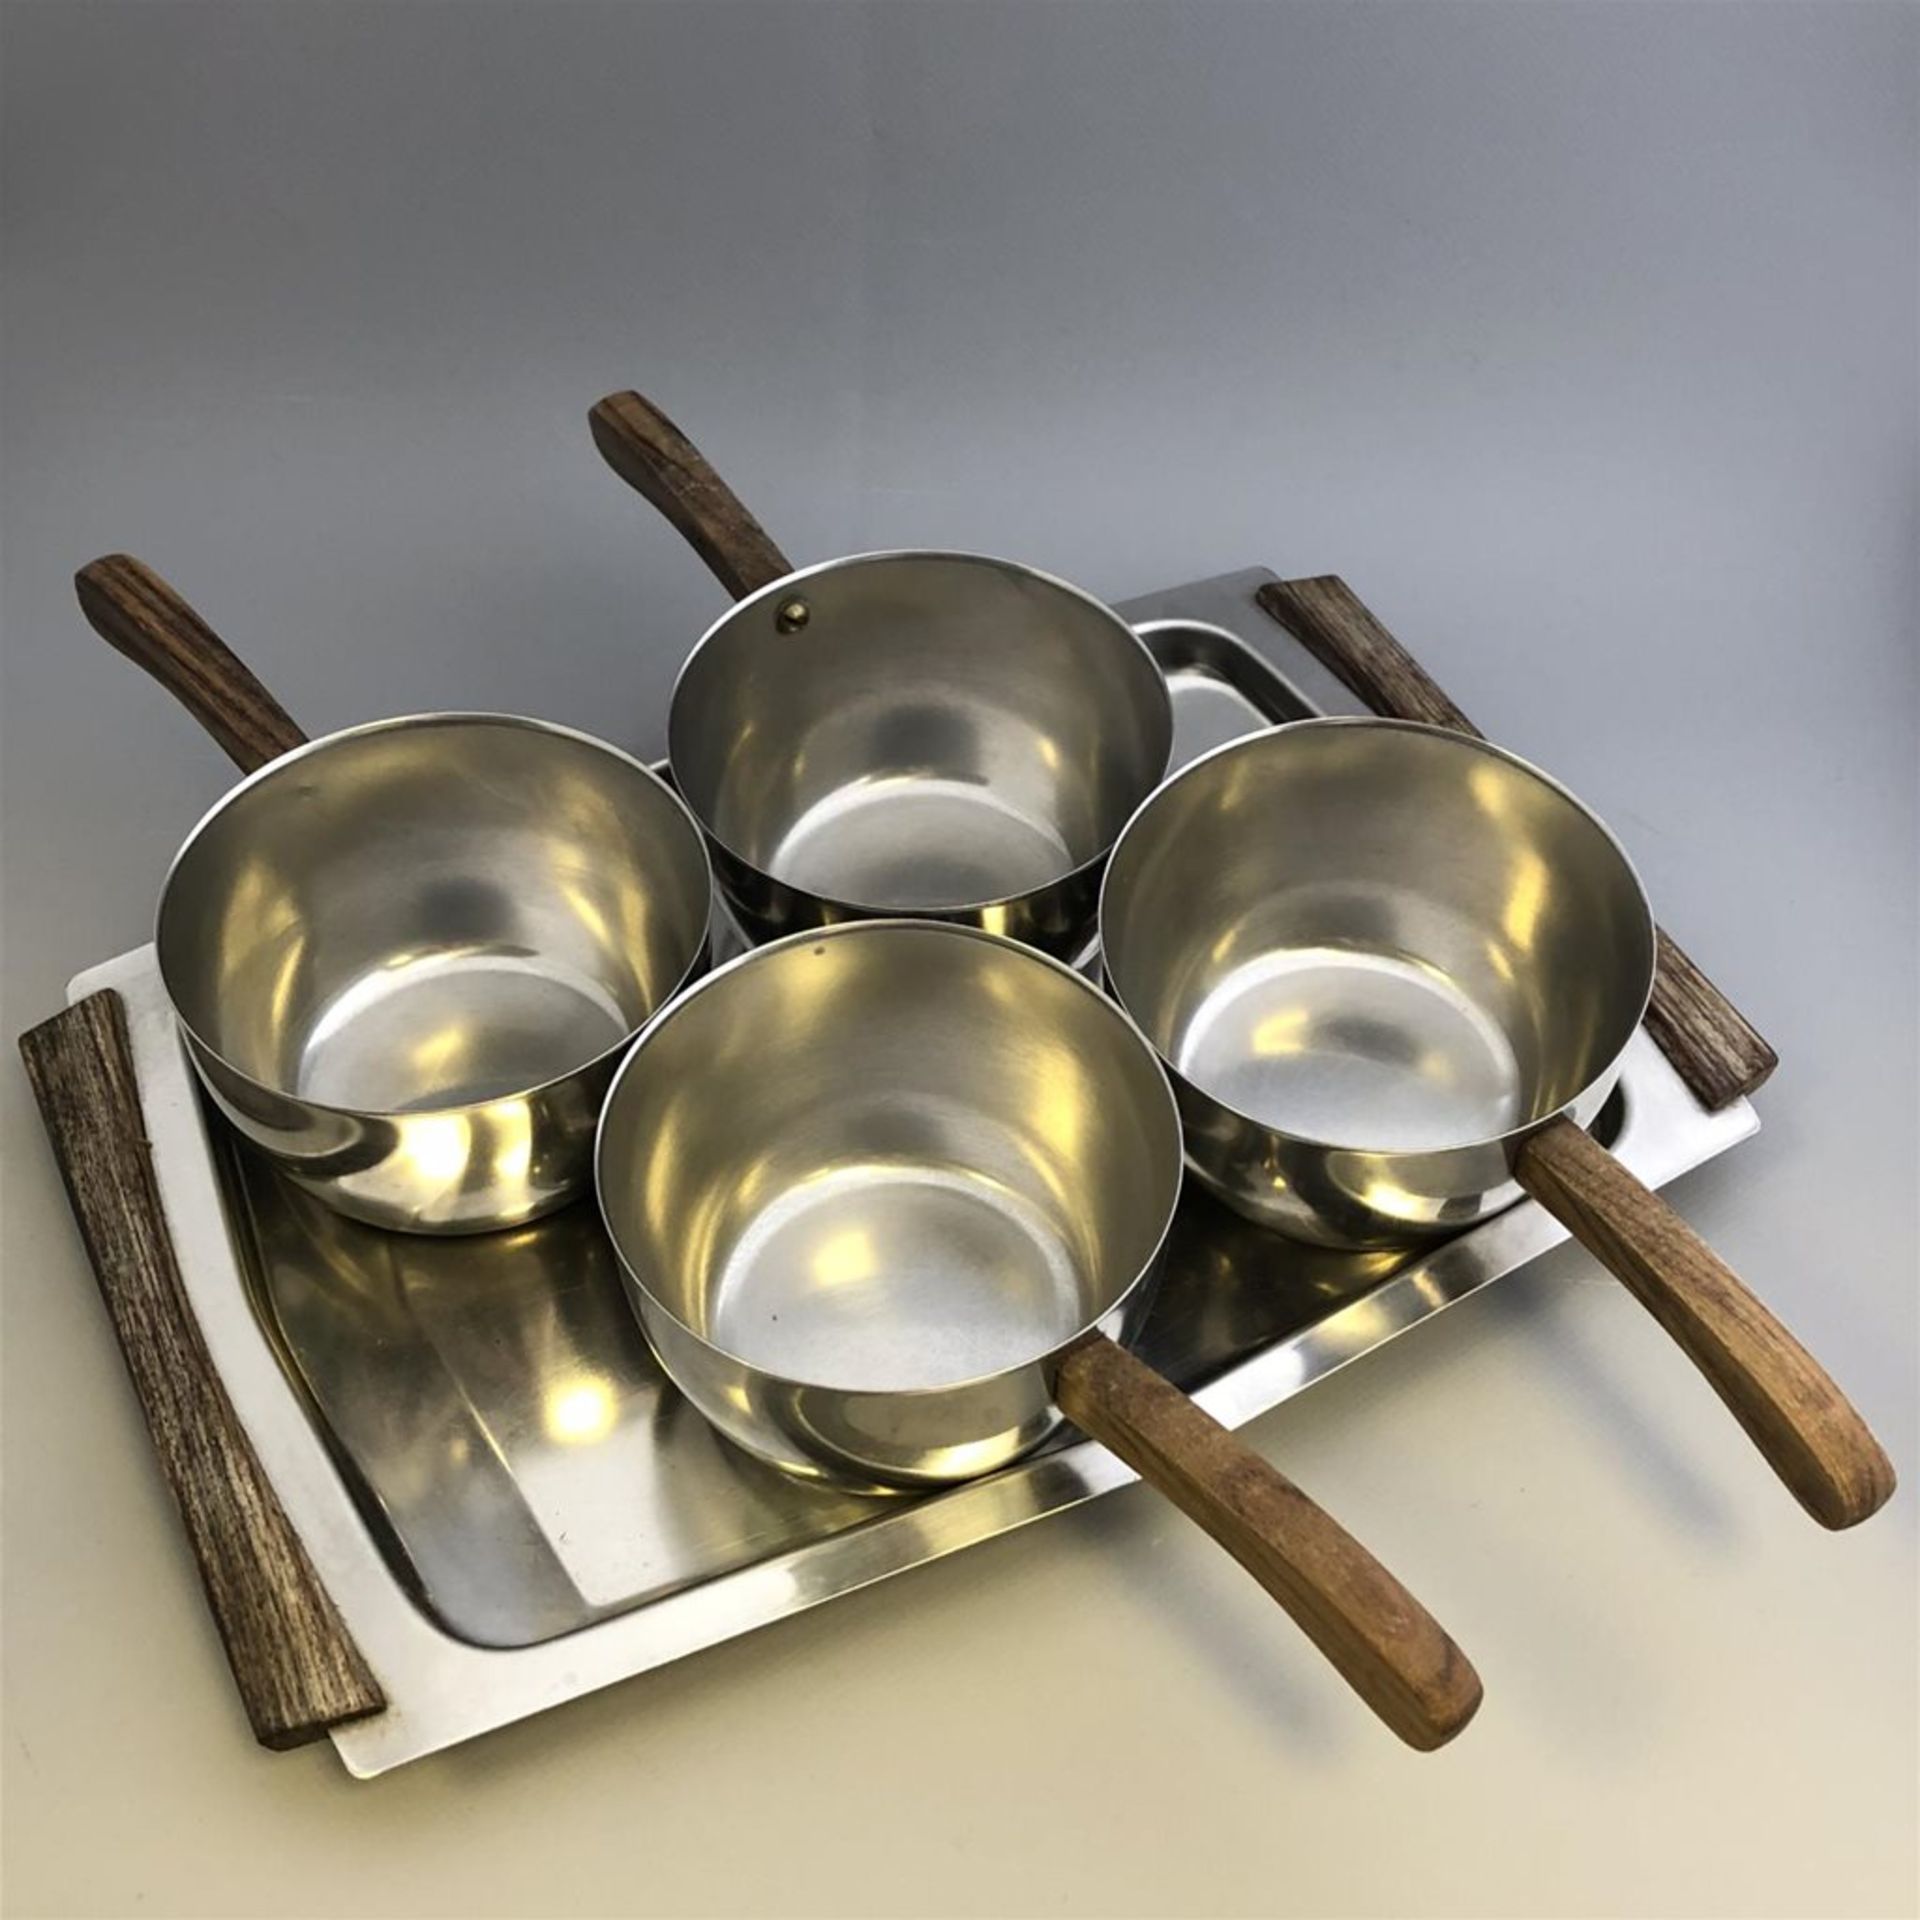 Stainless Steel and Teak Wood Set Comprising 4 Handled Bowls and a Tray - Denmark